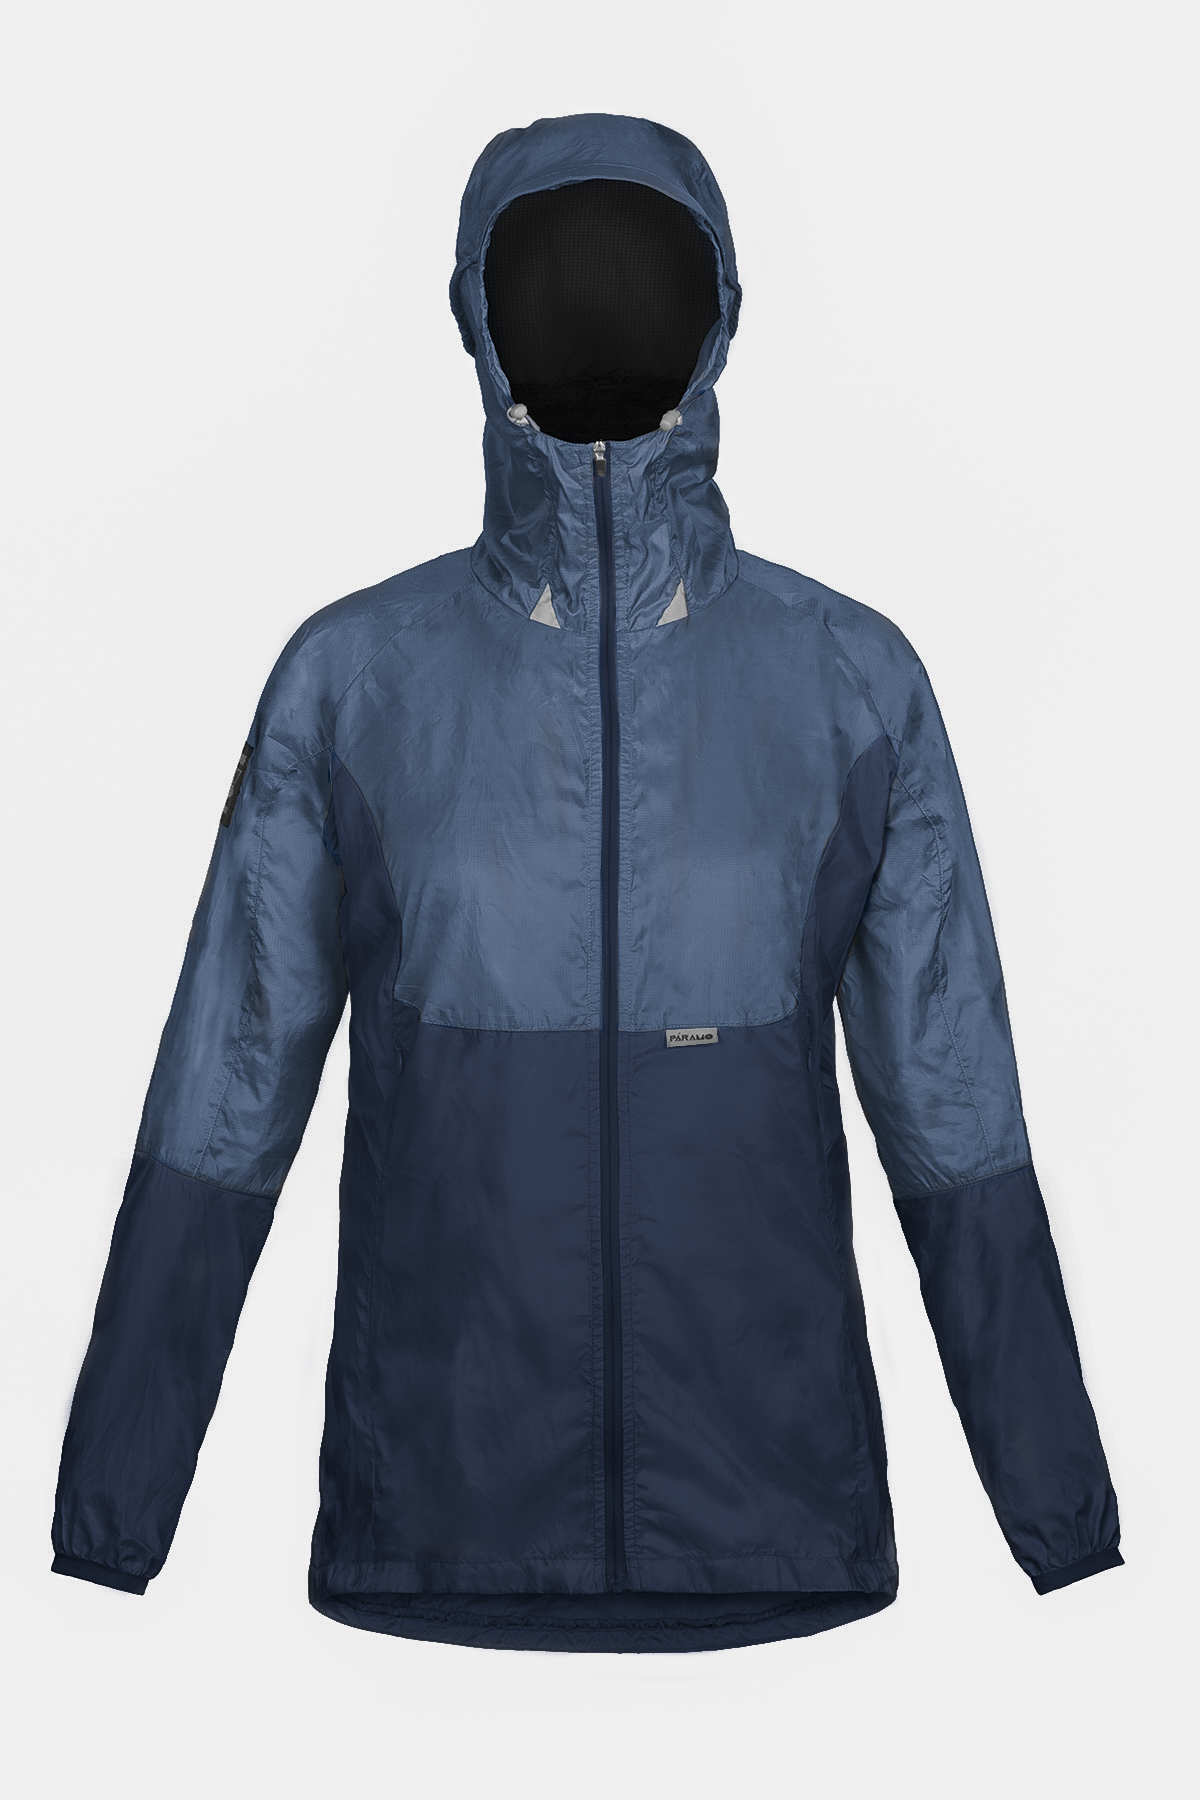 Windproof jacket women’s: Stay Protected in Style